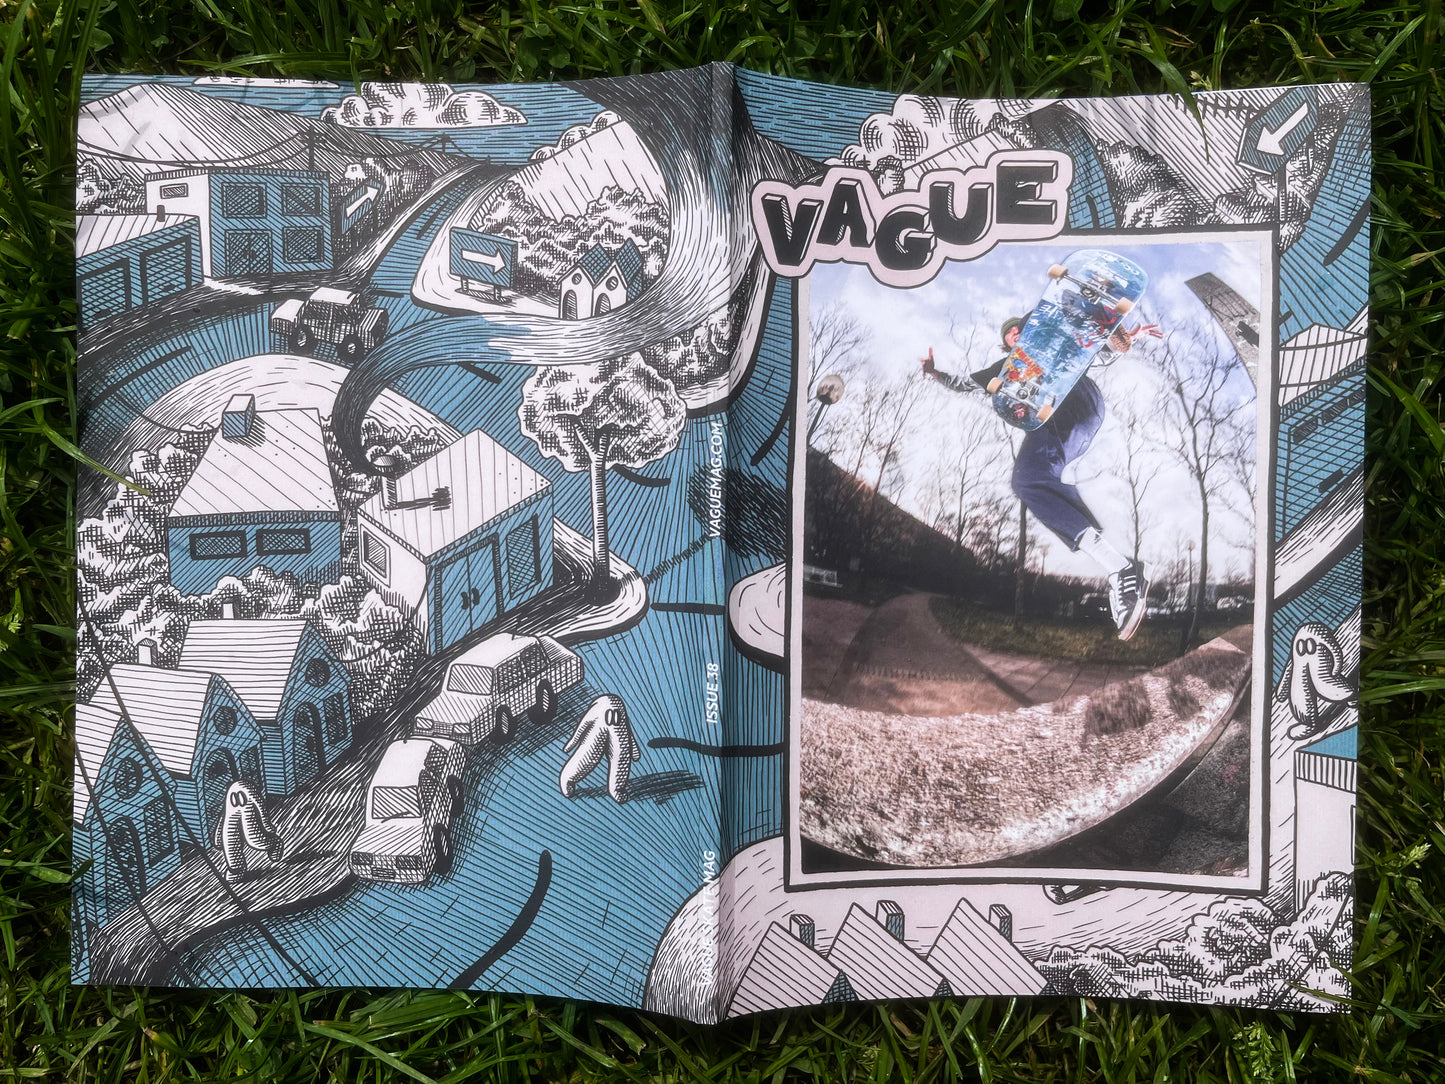 Vague Issue 38